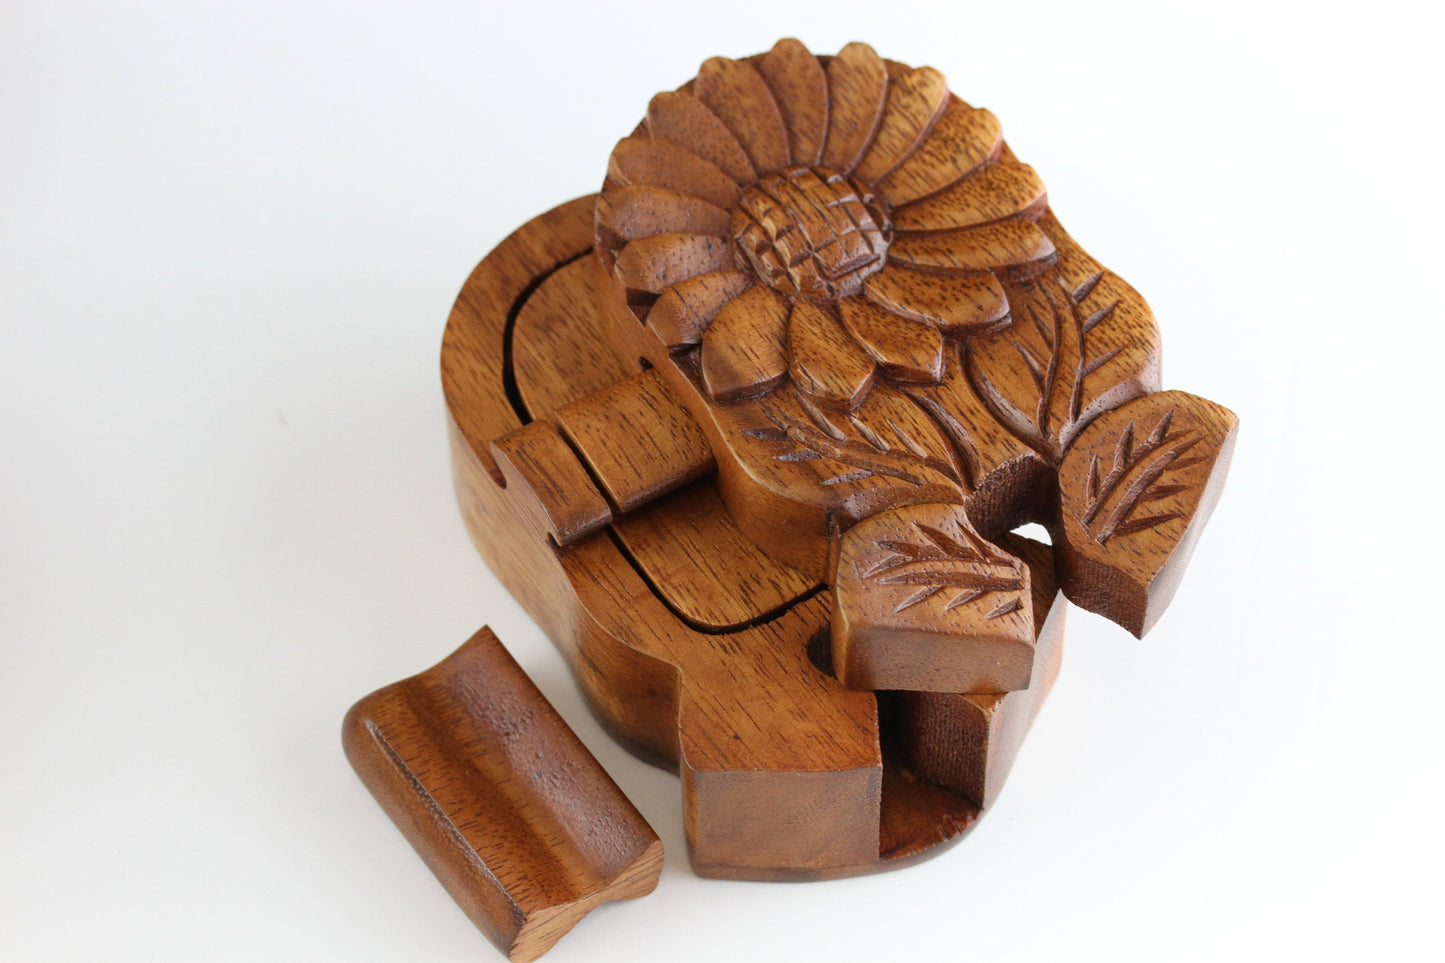 Sunflower Wood Puzzle Box - Plug Gift Box (Plugs not included)